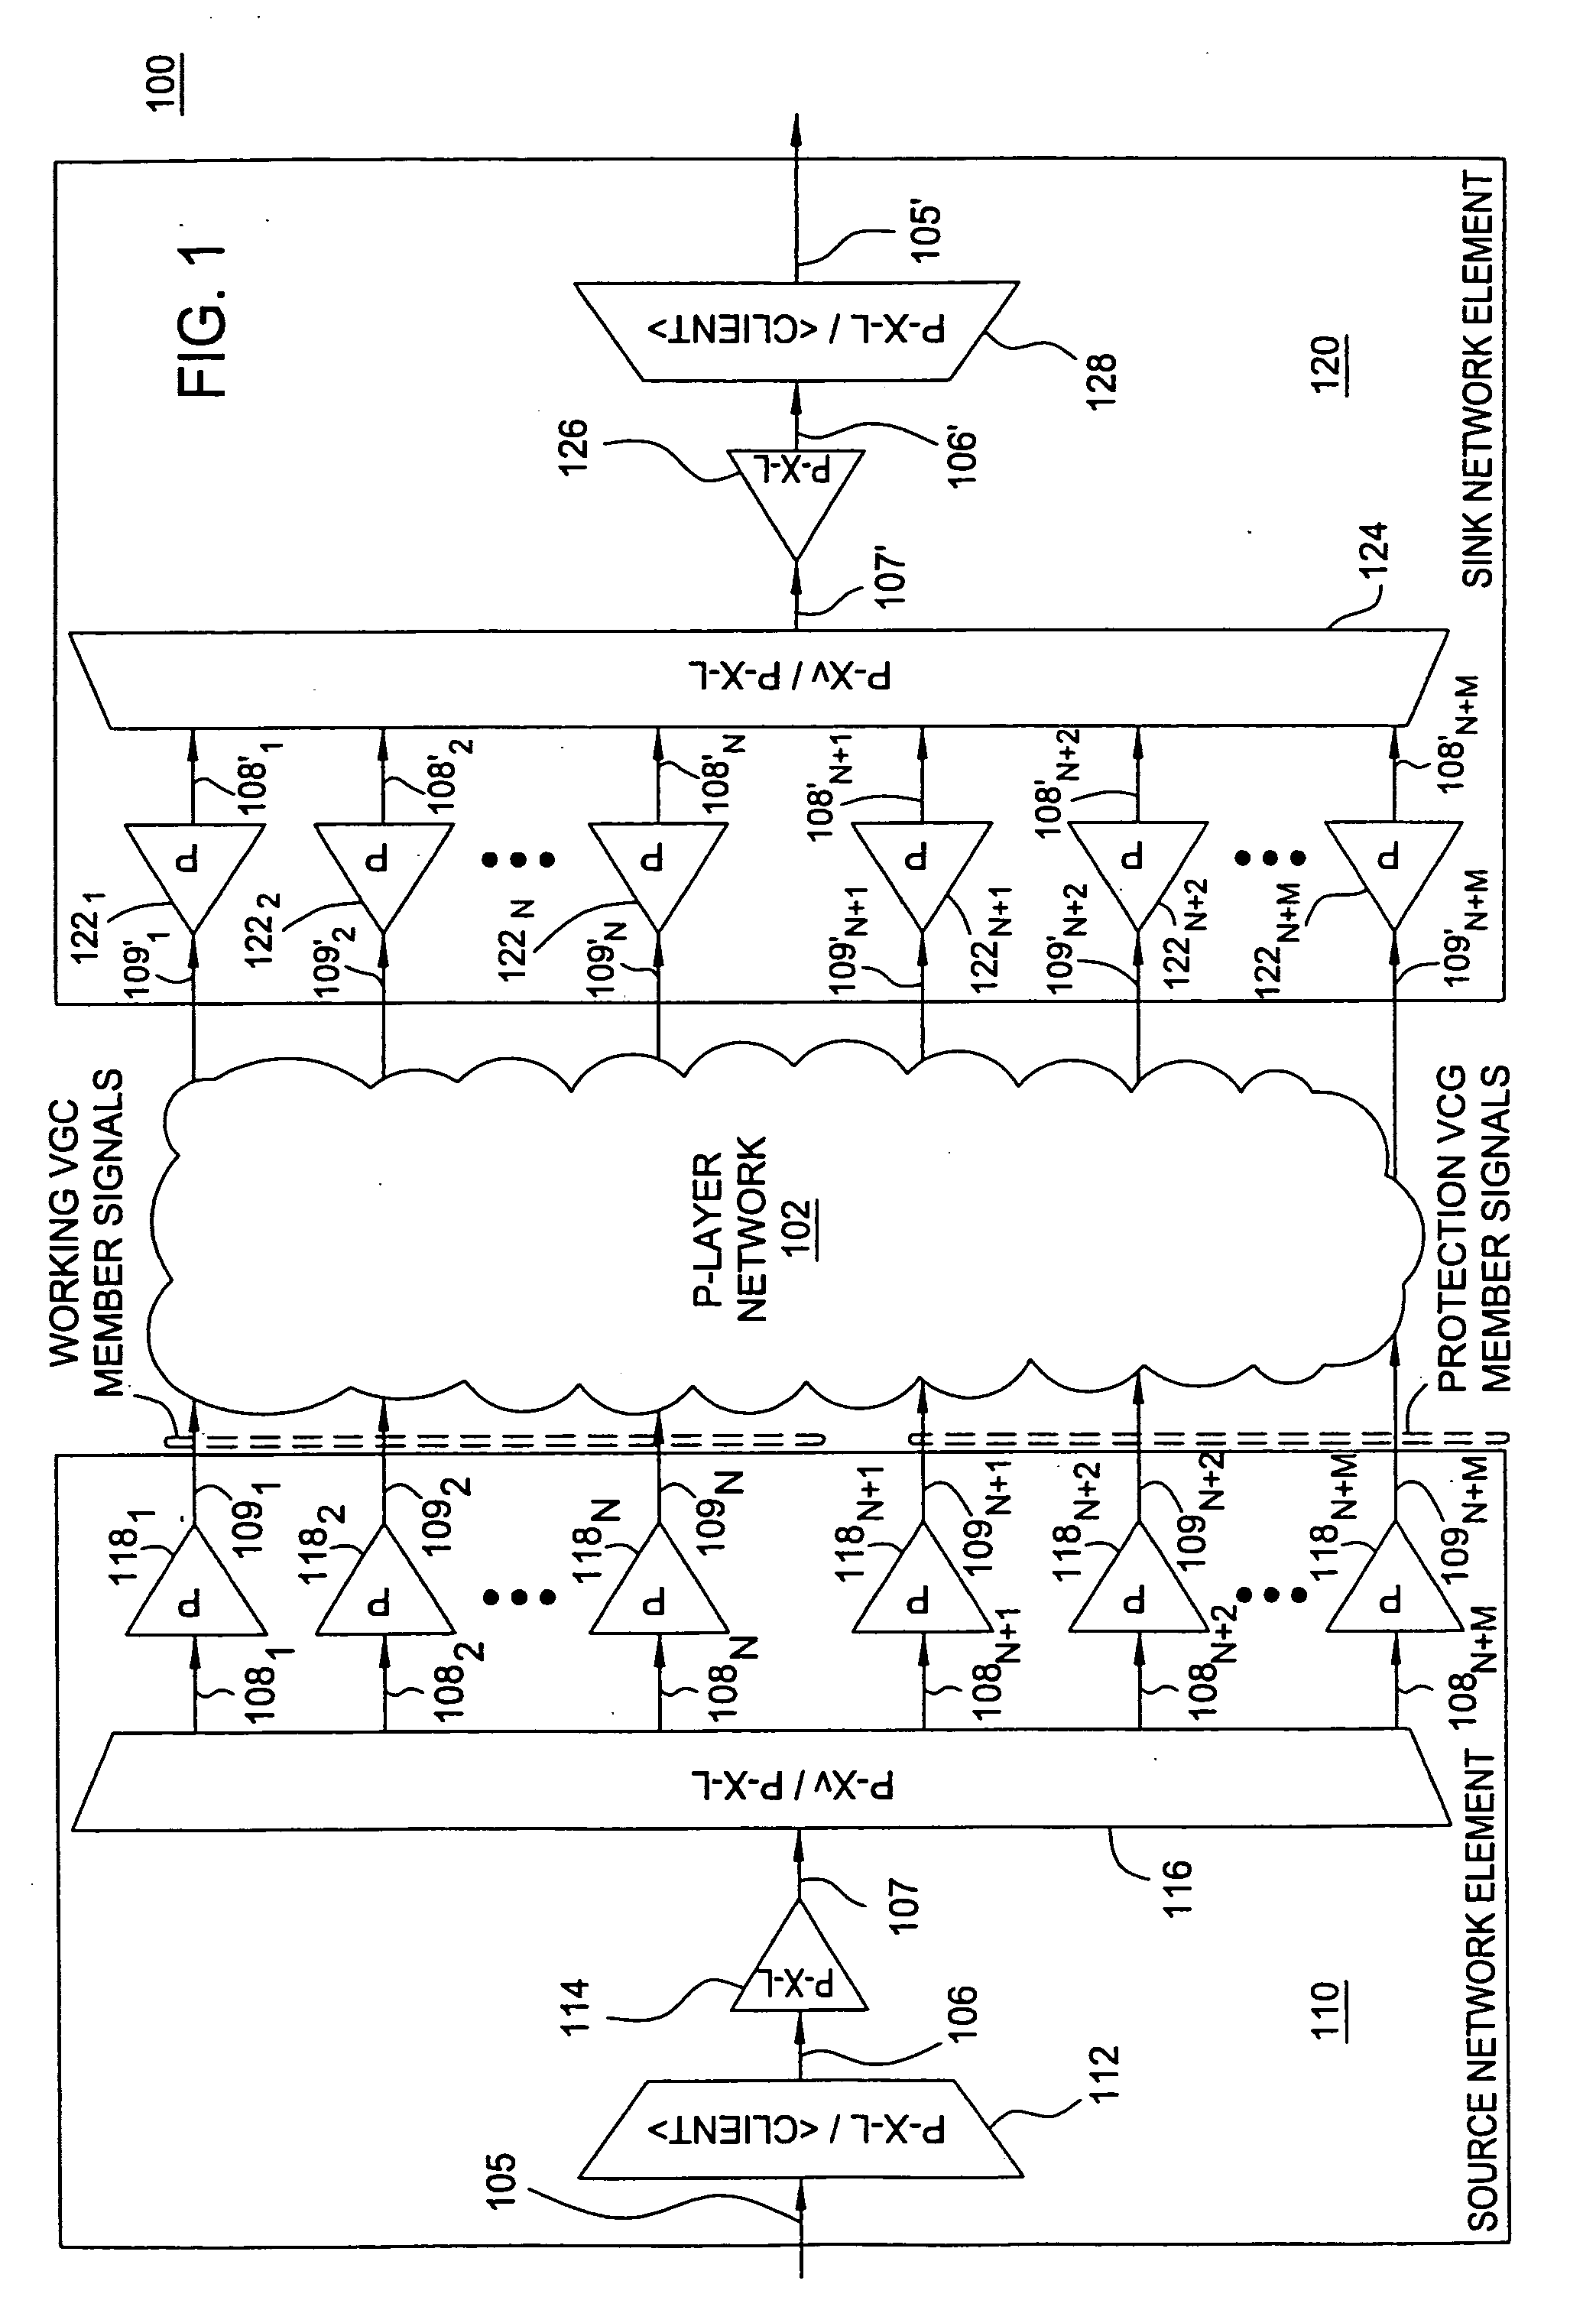 Method and apparatus for transporting client signals over transport networks using virtual concatenation